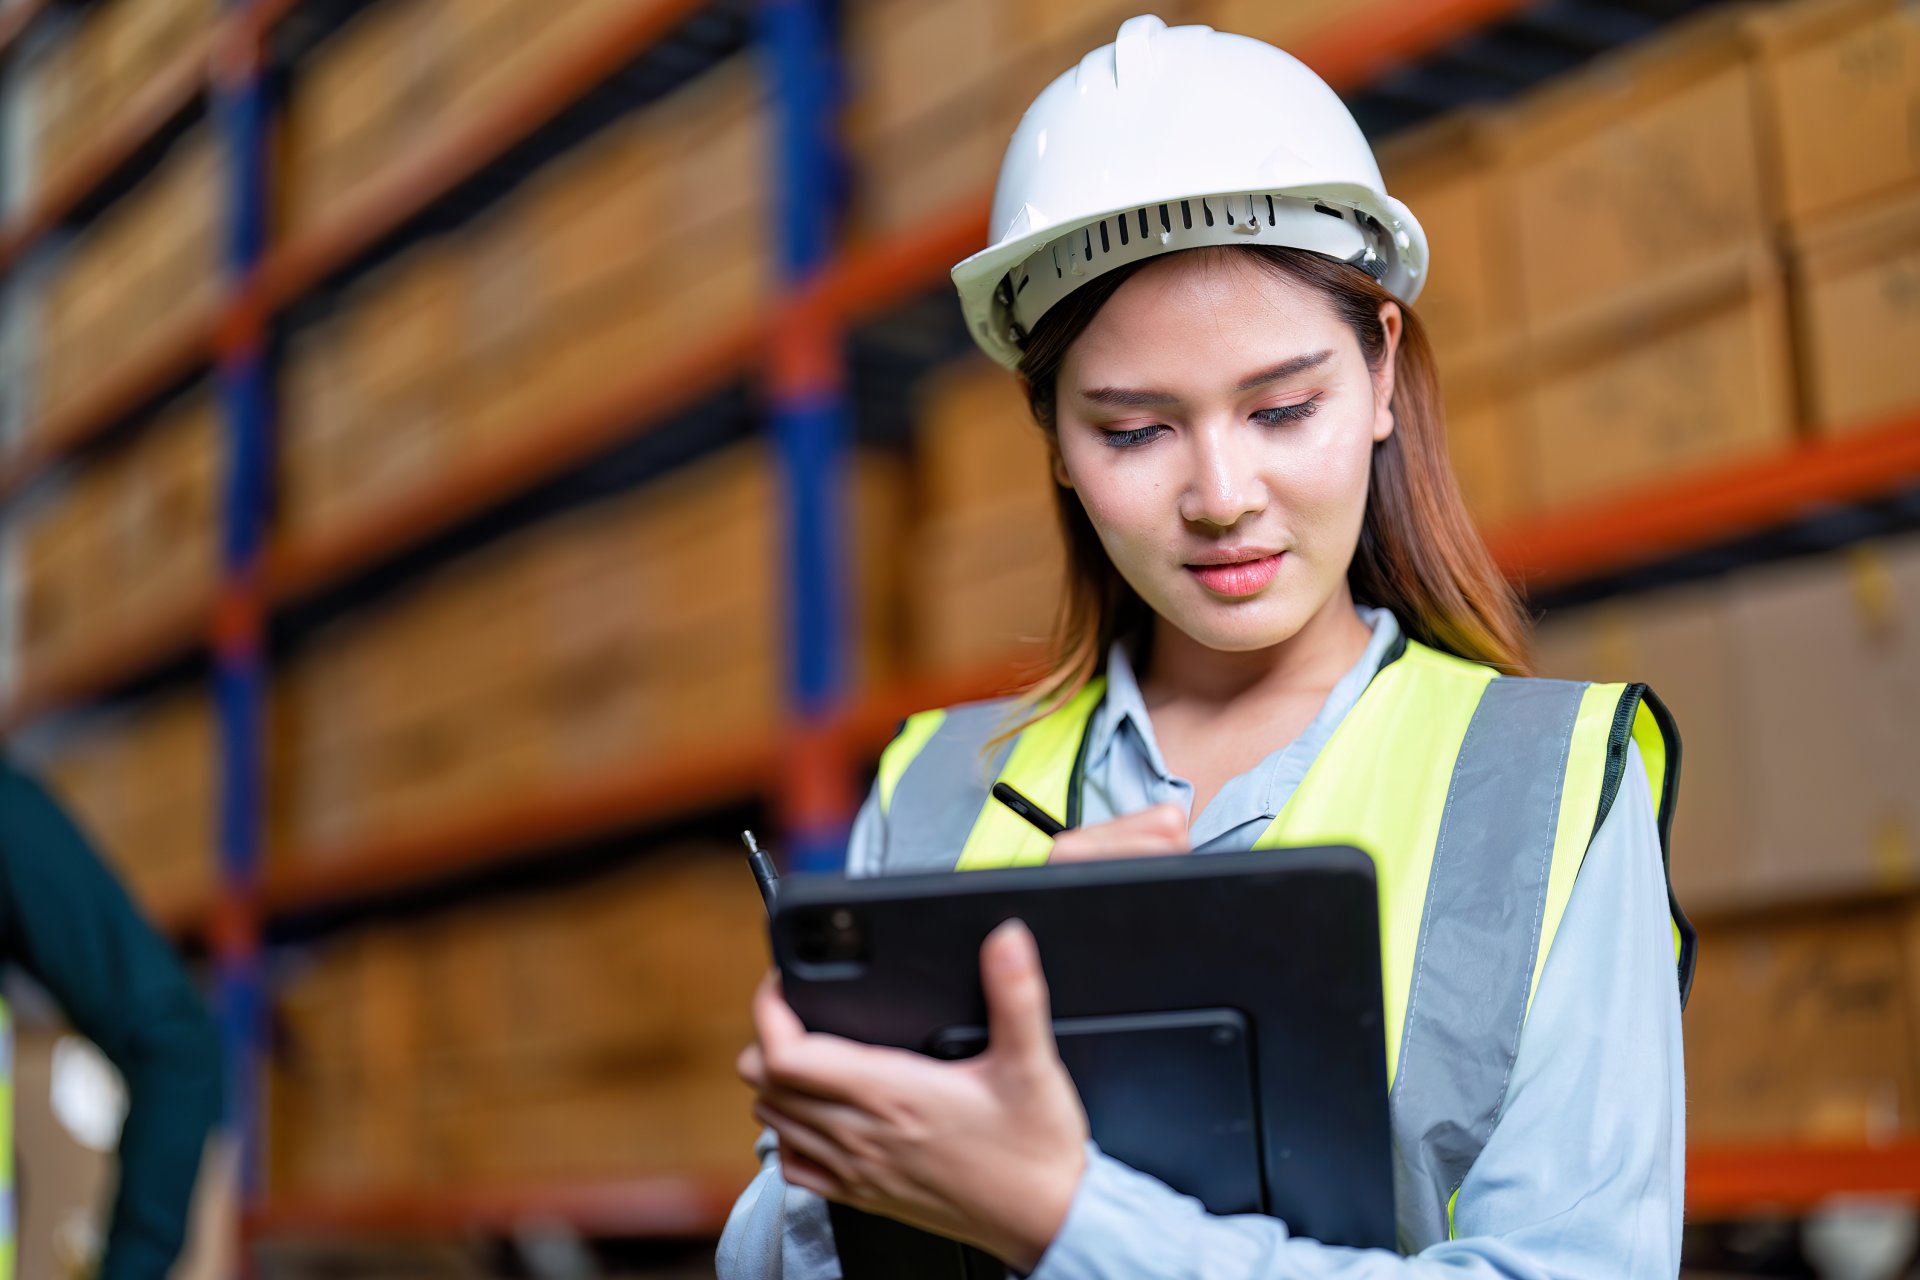 worker-in-warehouse-holding-check-list-tablet-pc-s-2023-11-27-05-19-10-utc-1